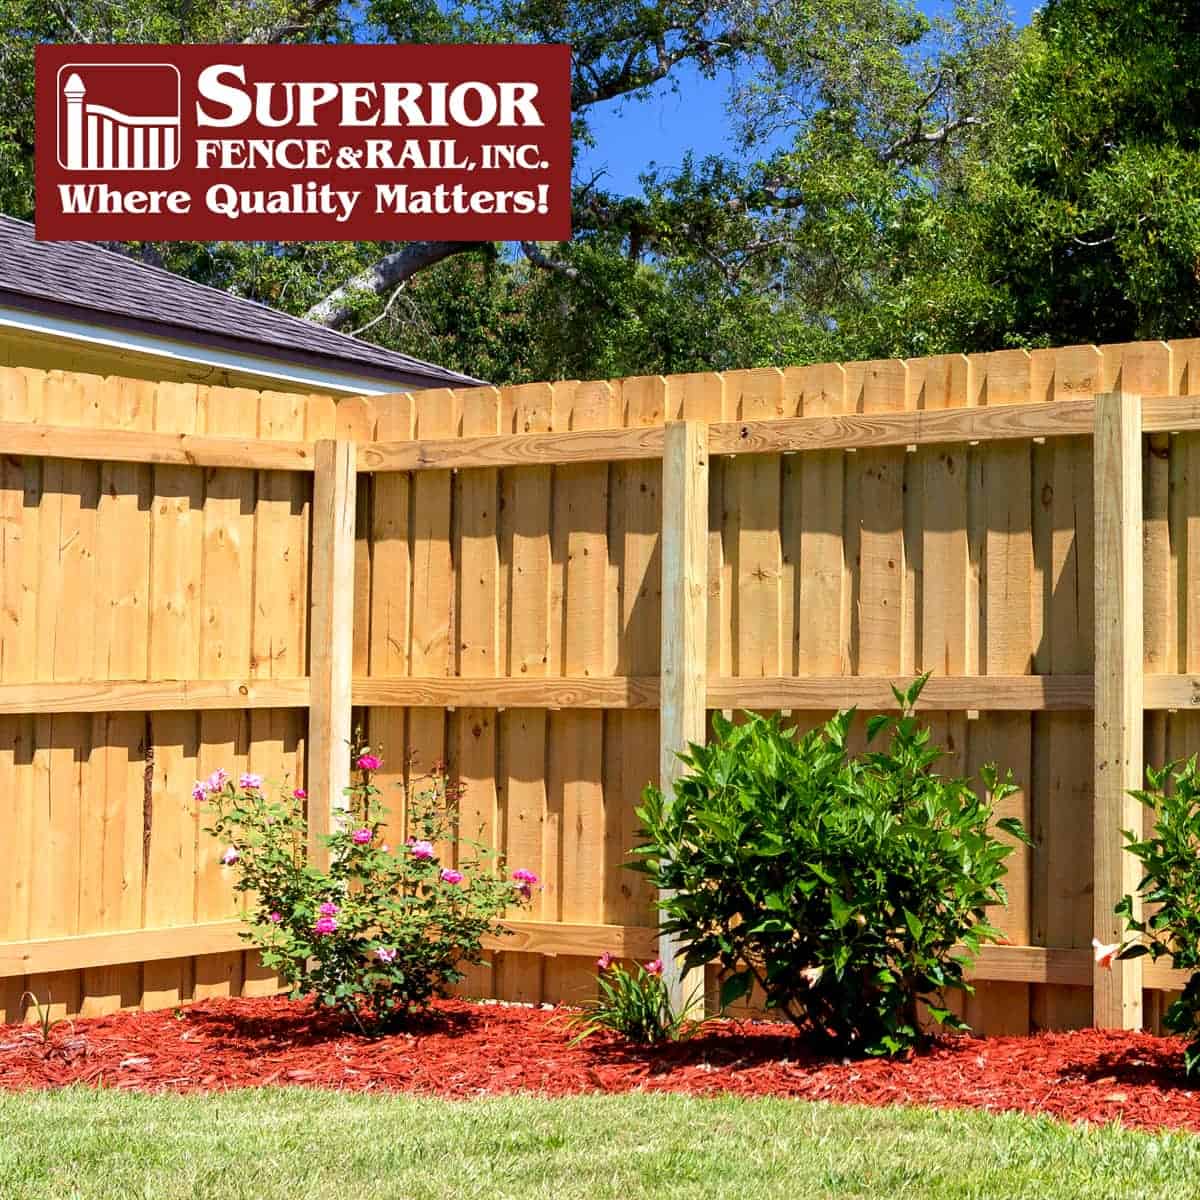 https://www.superiorfenceandrail.com/wp-content/uploads/2022/01/Willoughby-Fence-Company-Contractor.jpg